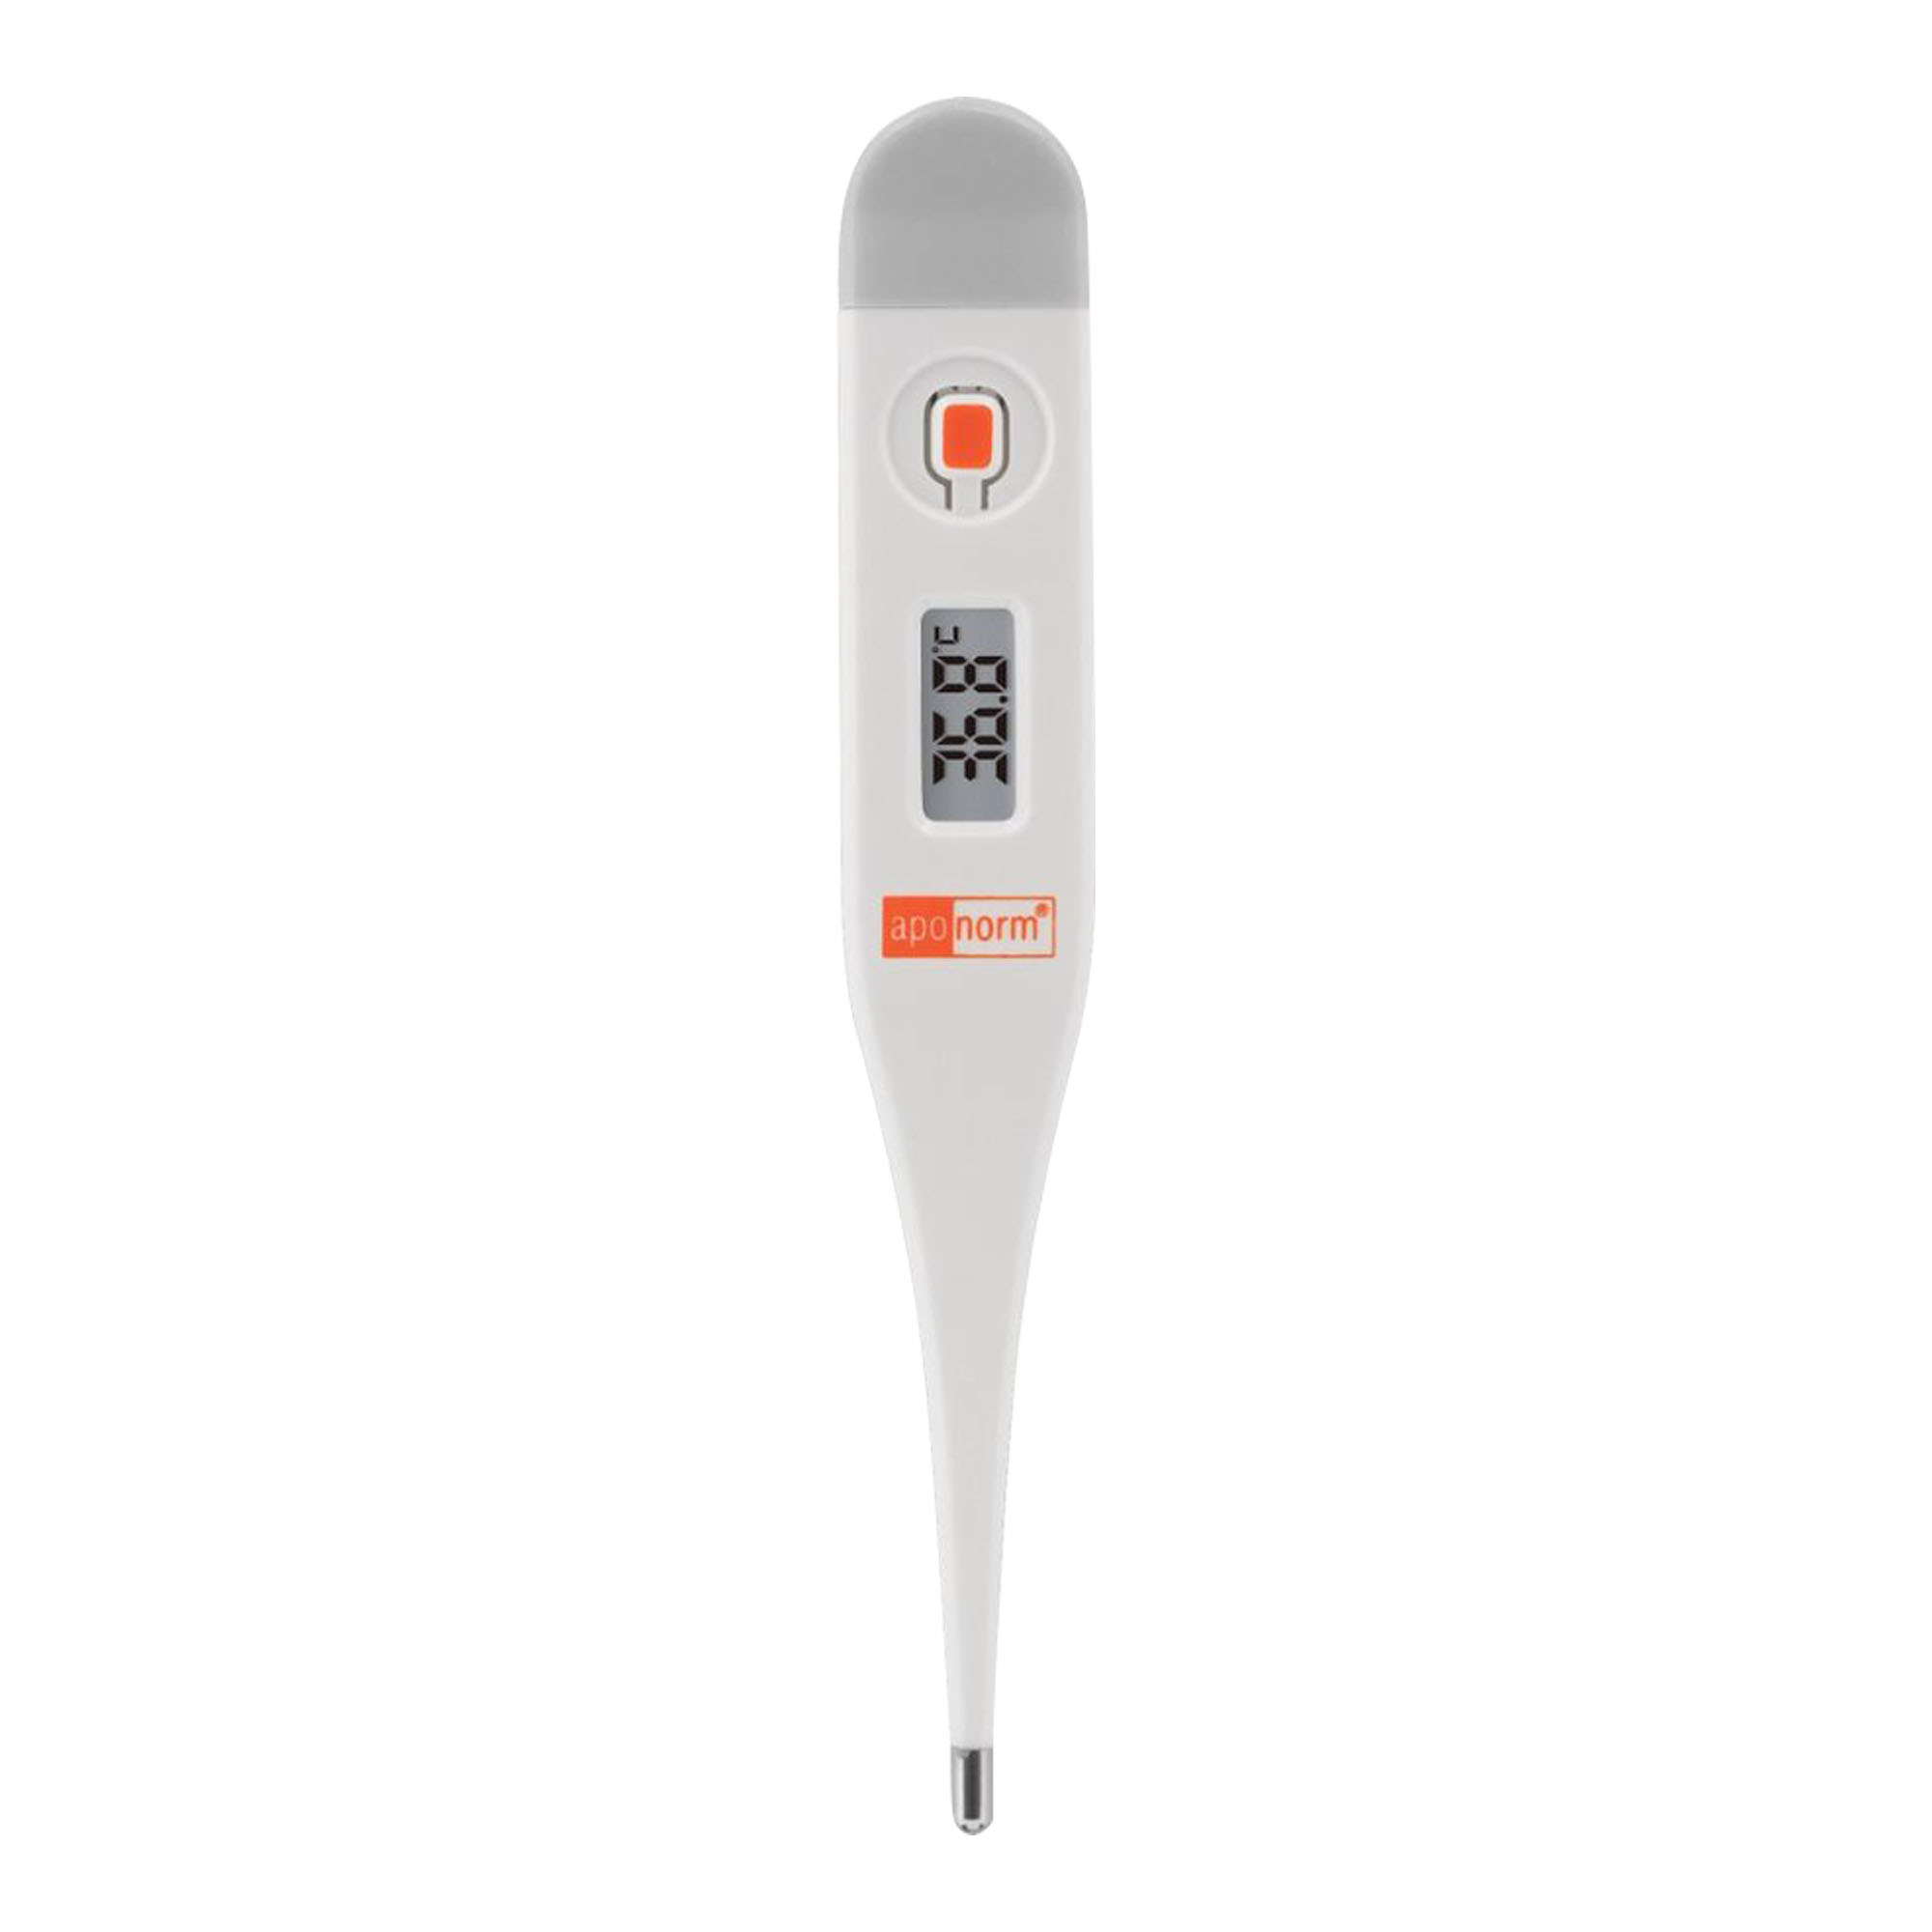 Aponorm Fieberthermometer easy